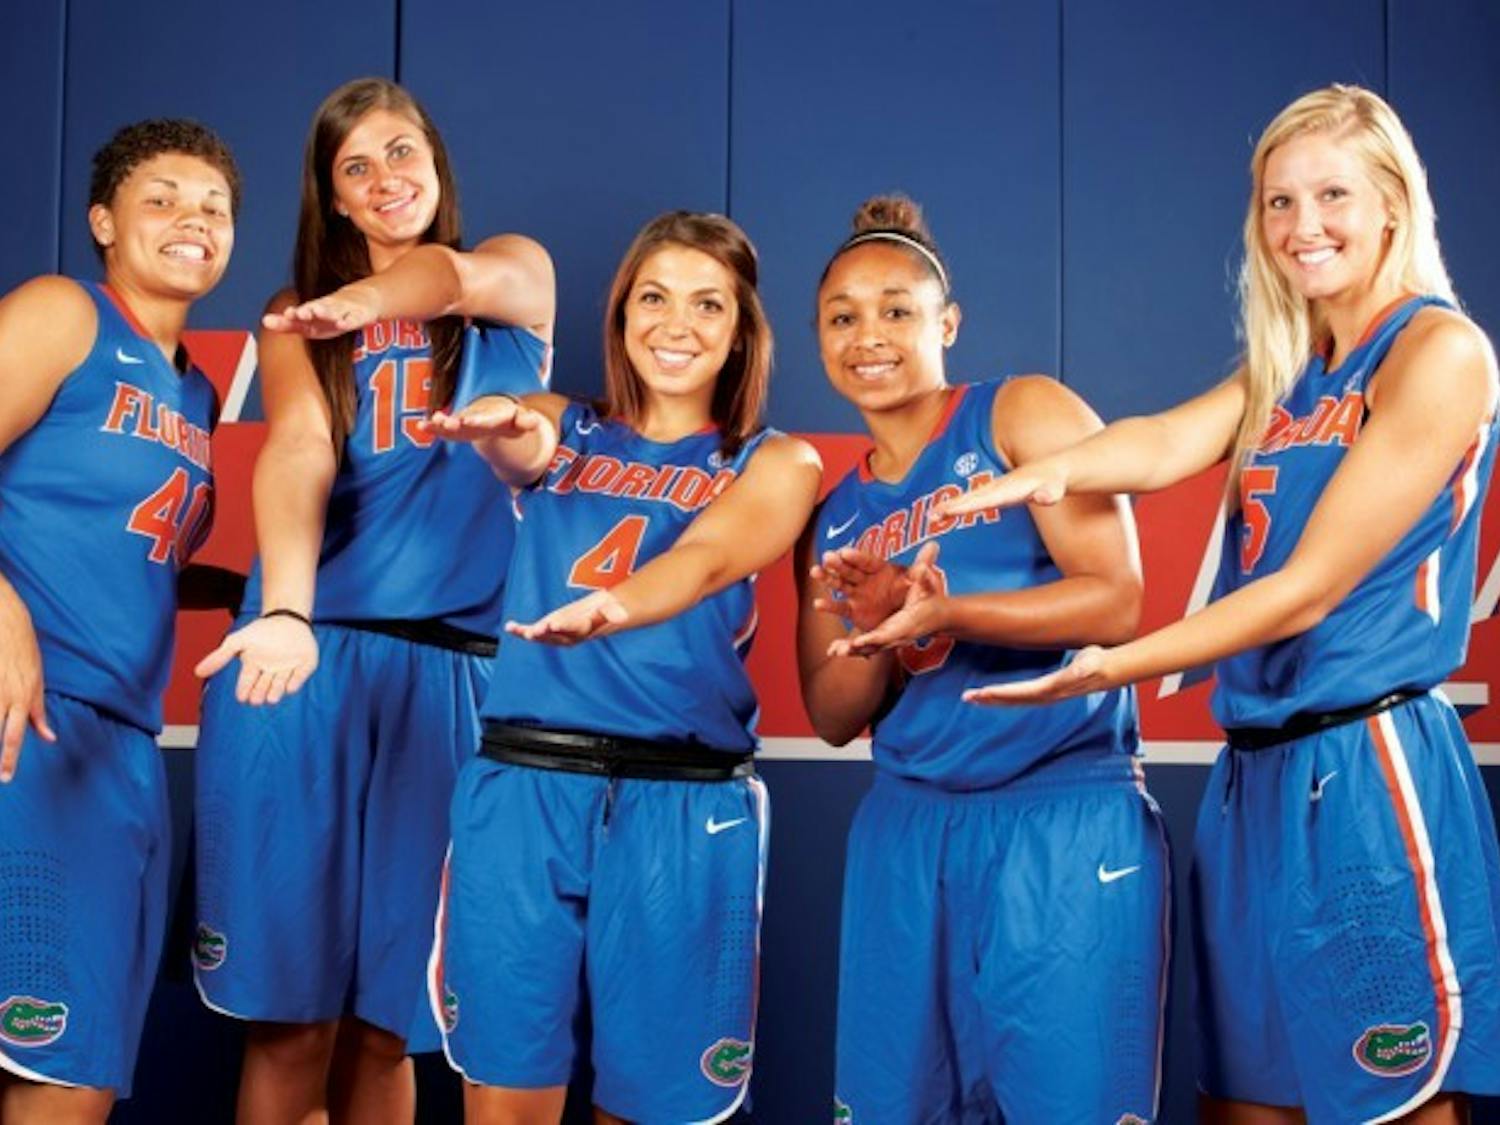 Redshirt freshman Carlie Needles (third from left) poses for a photo with four other freshmen during University of Florida basketball media day on Oct. 10. Needles hit the game-winning three pointer with six seconds left against the N.C. State Wolfpack on Friday night at the South Point Thanksgiving Shootout in Las Vegas.